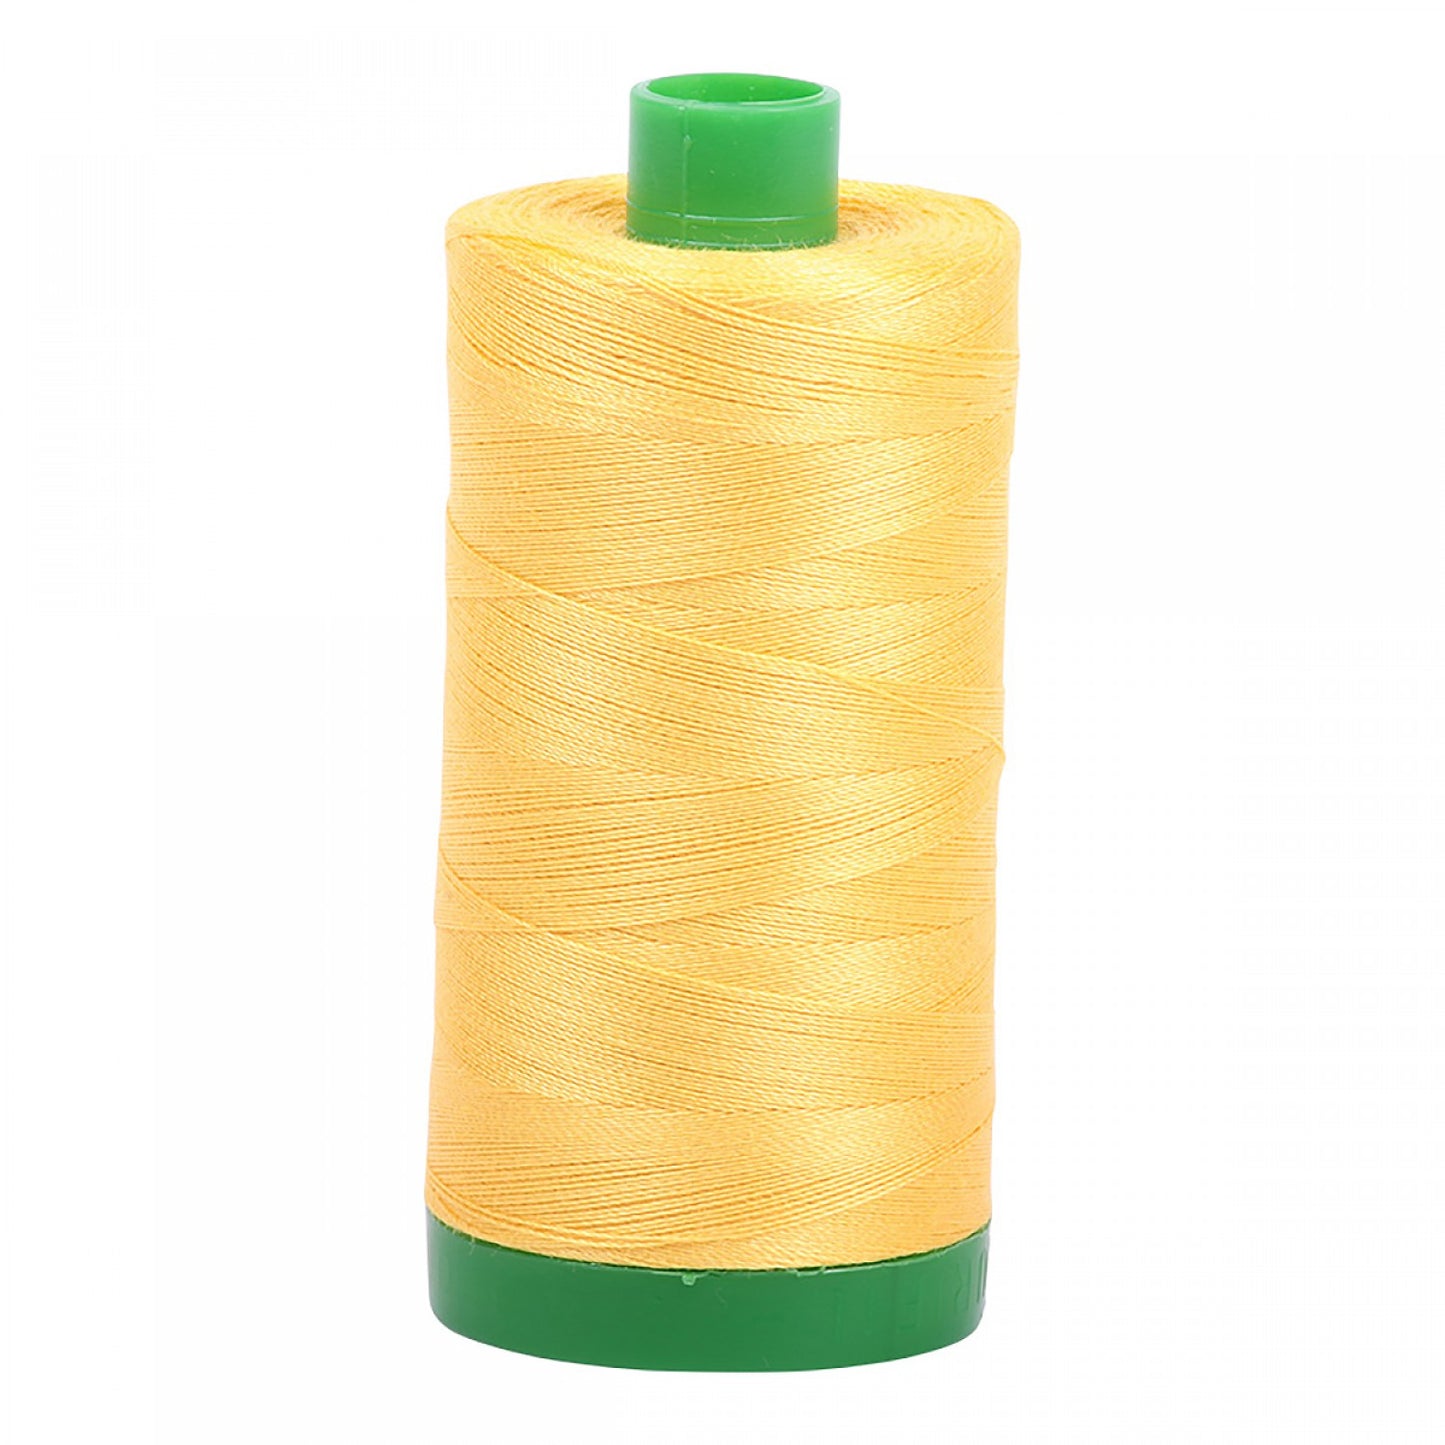 Mako Cotton Embroidery Thread 40wt 1094yds Pale Yellow : Aurifil